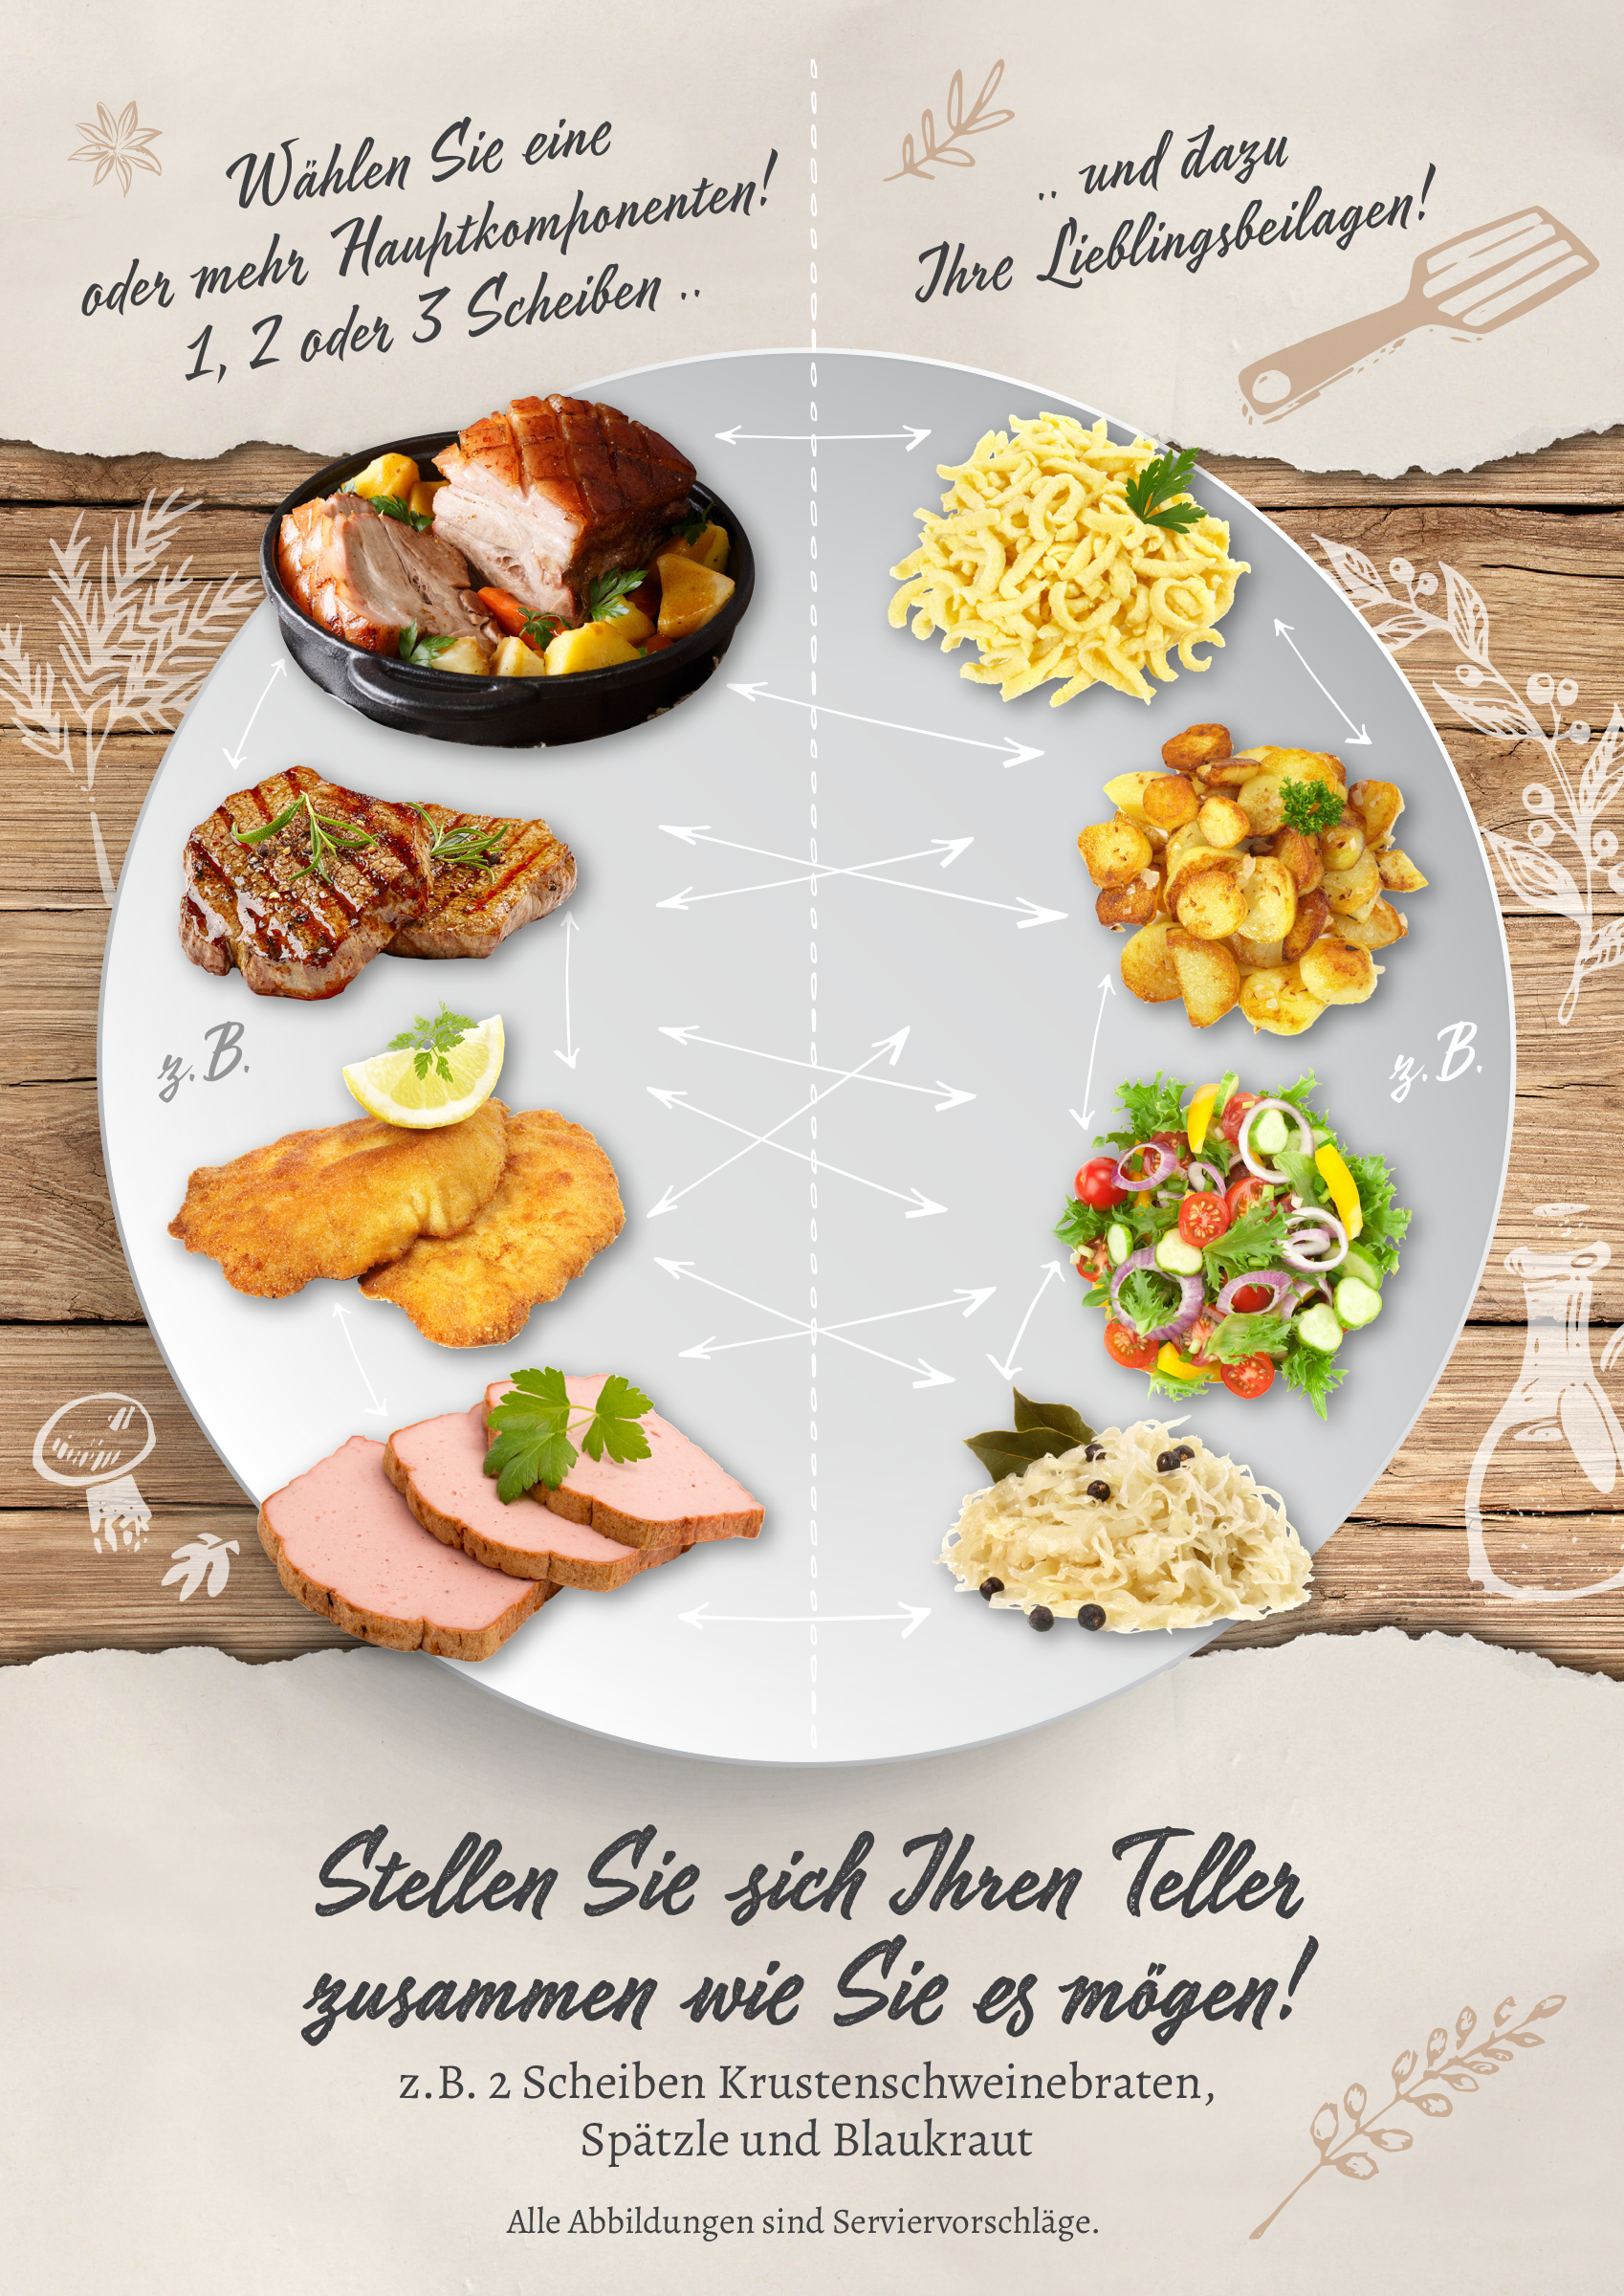 Flyer: Put your own plate together